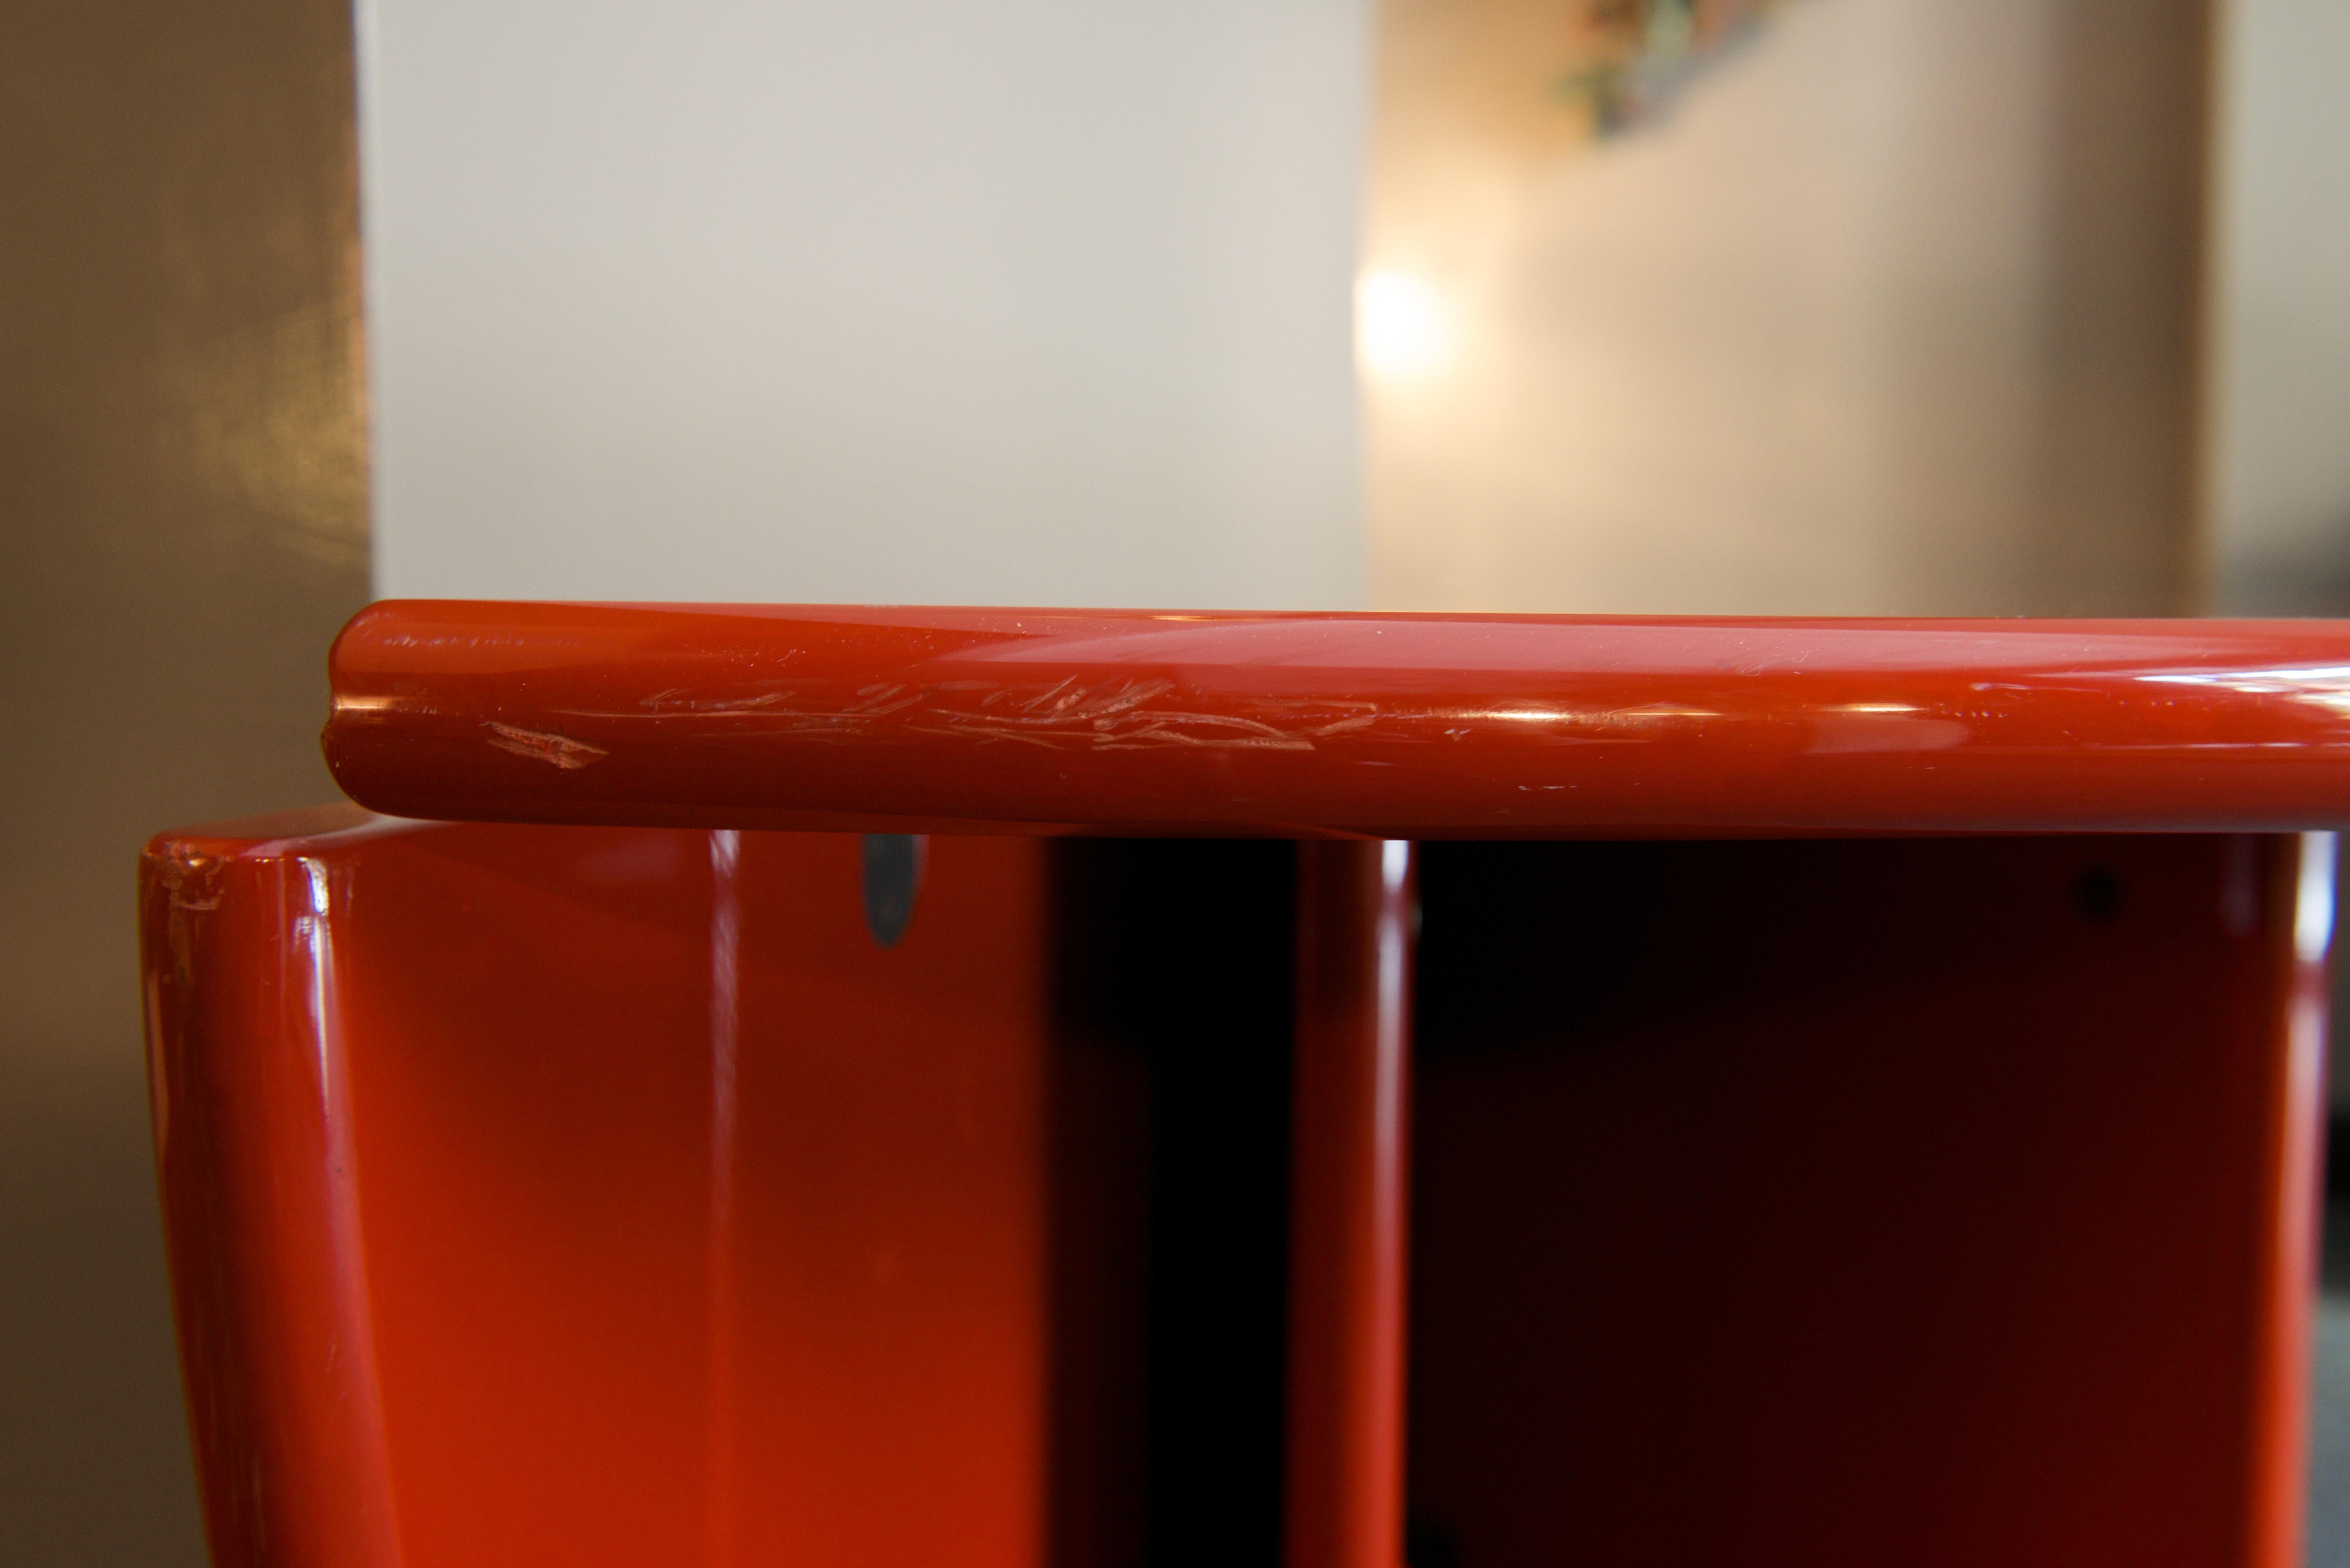 Italian Antella, Oval Console Table by K. Takahama for Simon, Red Lacquer, Italy, 1978